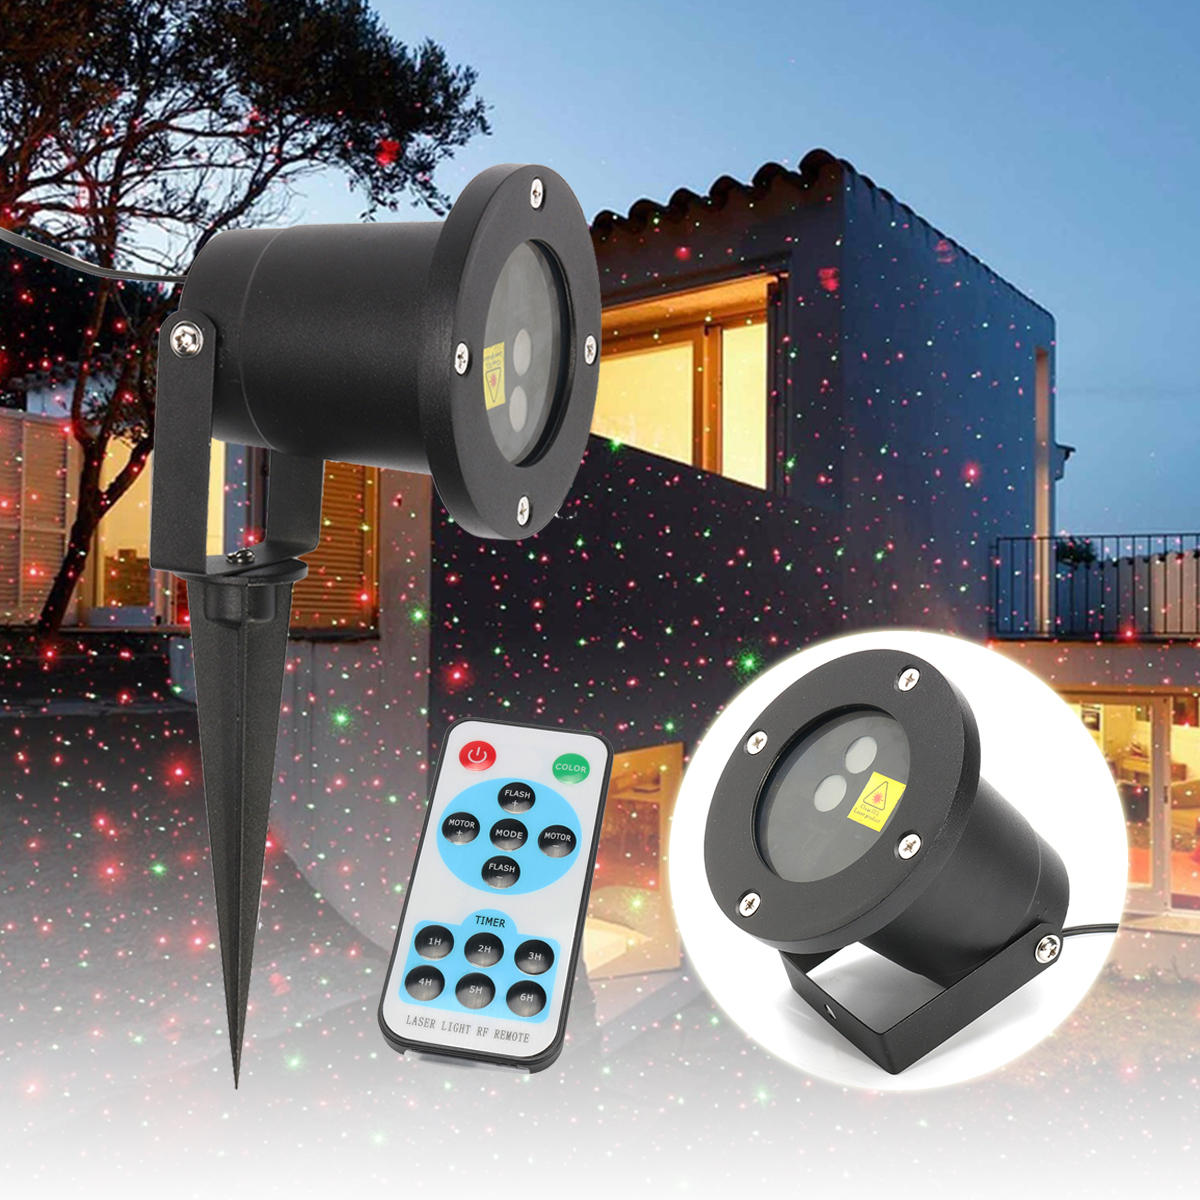 Christmas Star Projector Stage Light Waterproof R&G LED Remote Control Outdoor Landscape Lamp Christmas Decorations Clea